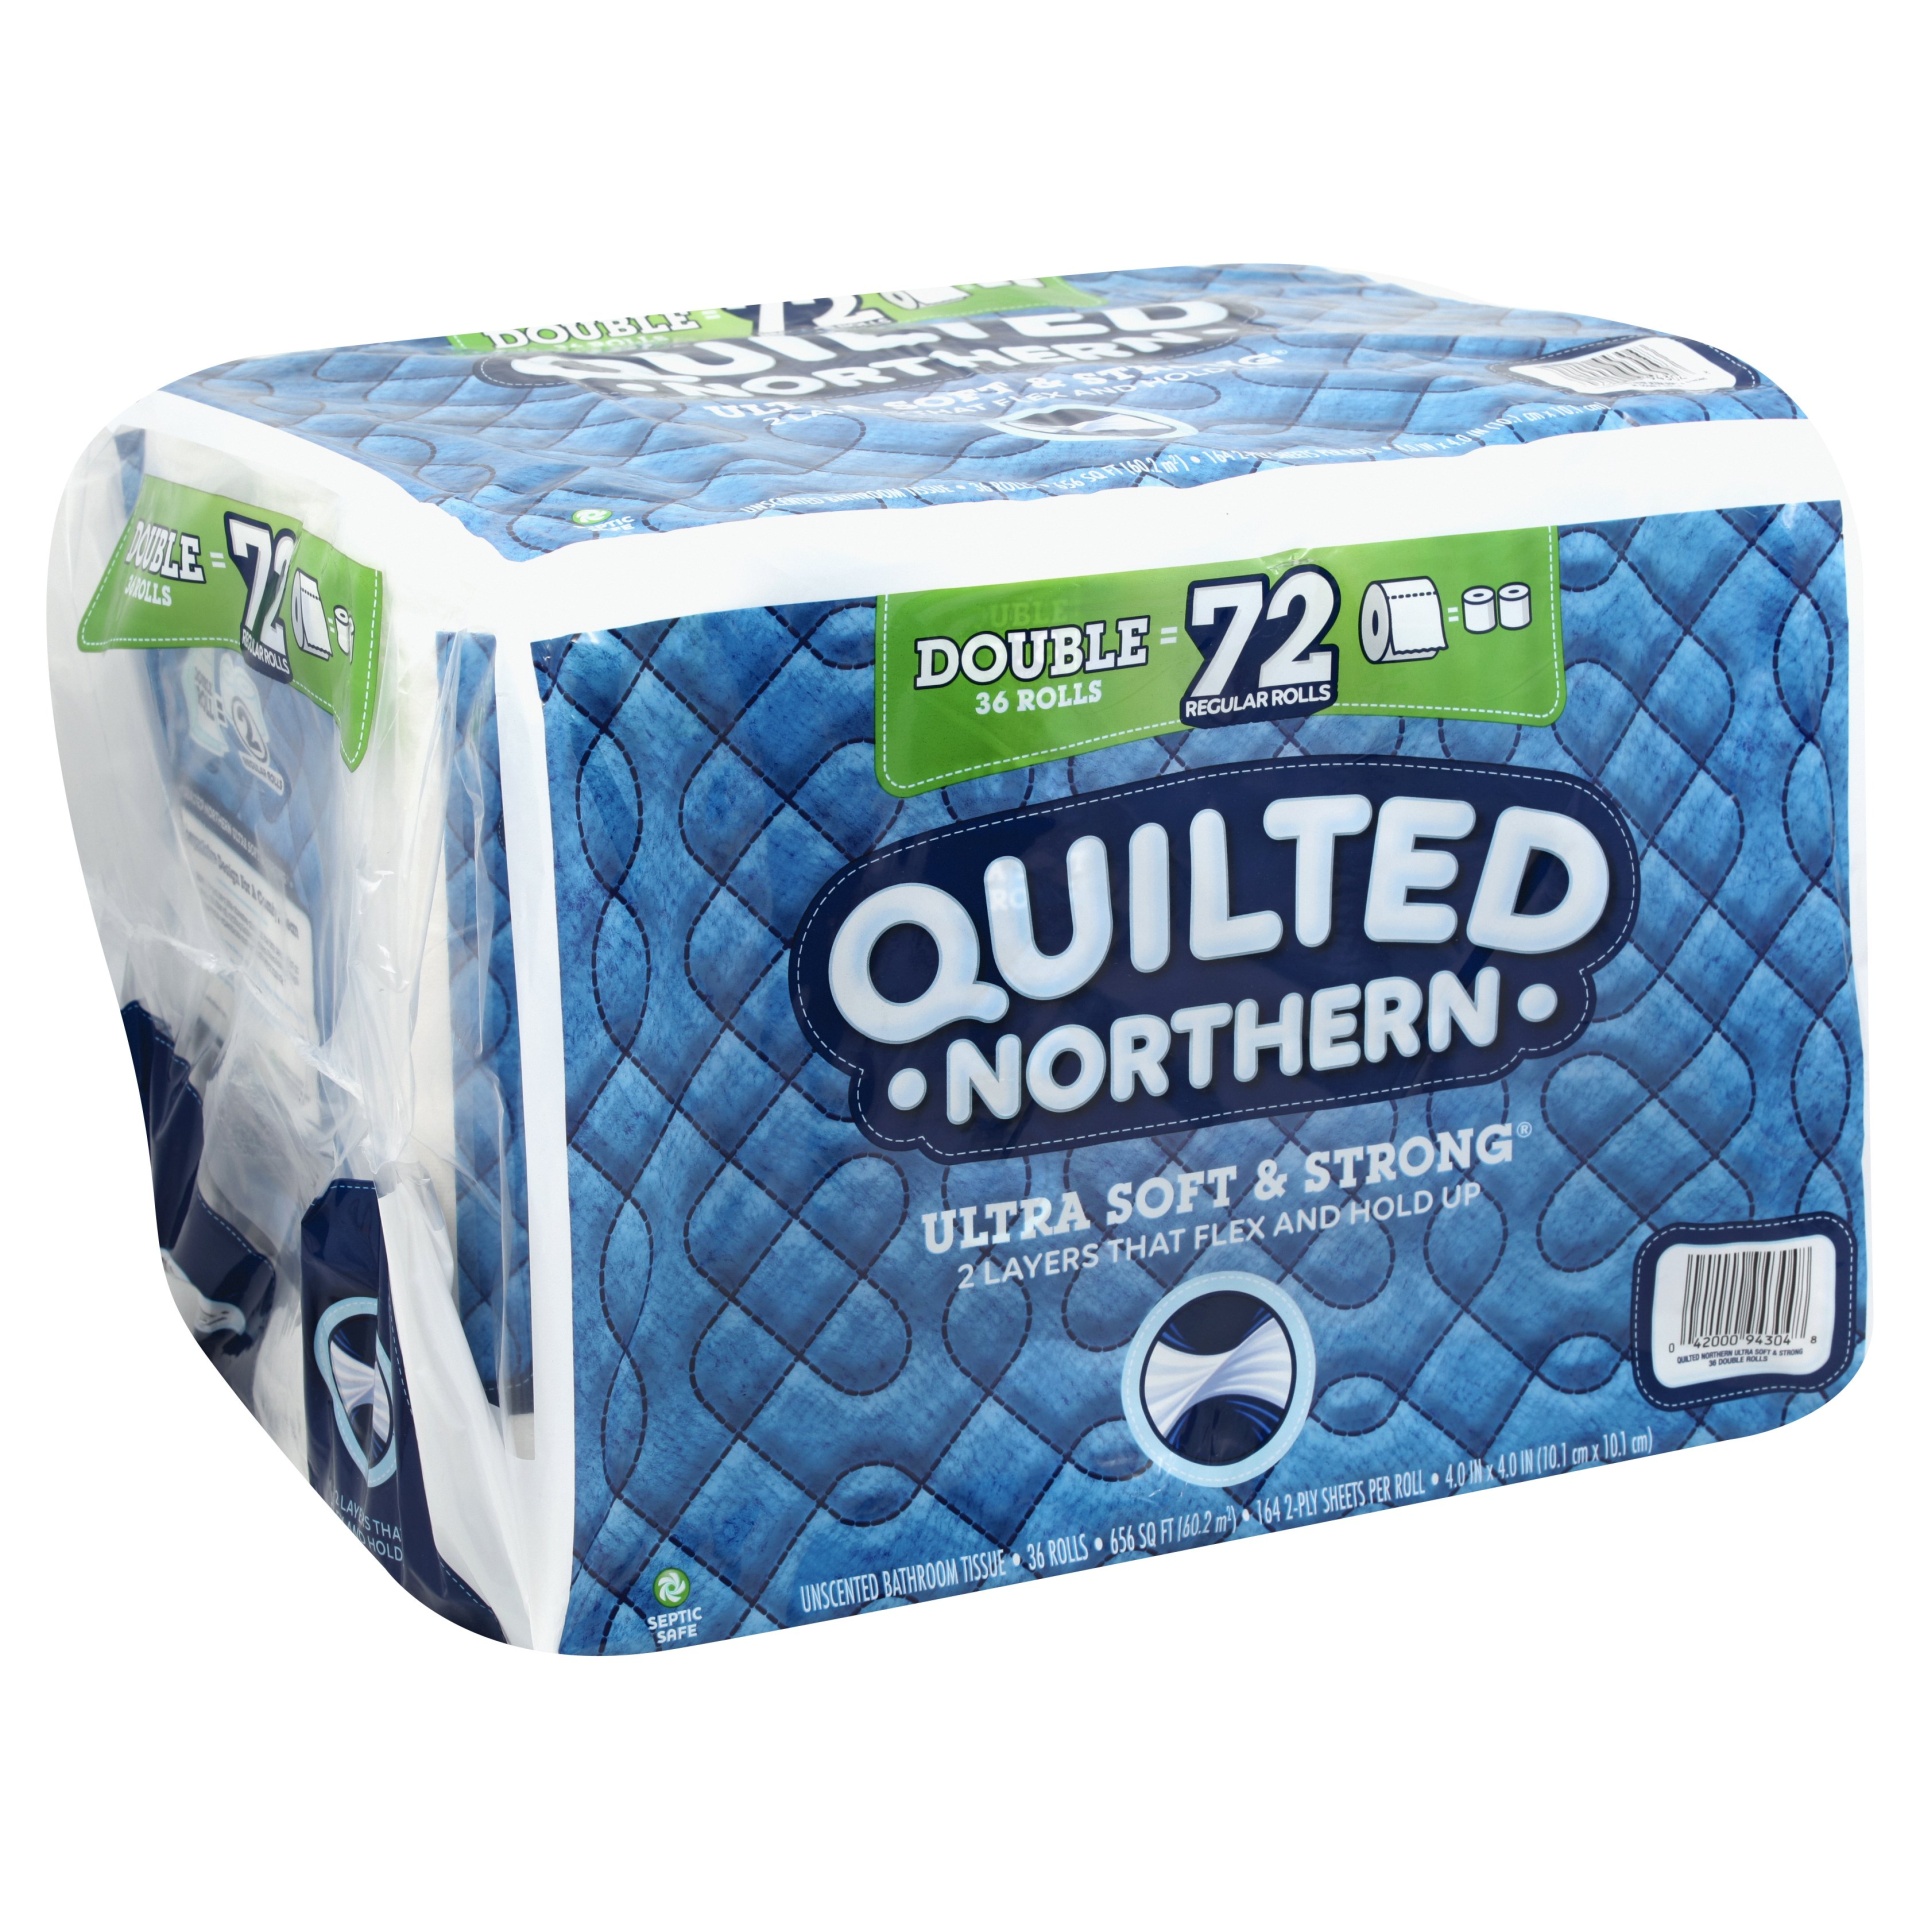 slide 1 of 1, Quilted Northern Soft & Strong Bath Tissue Double Roll, 36 ct